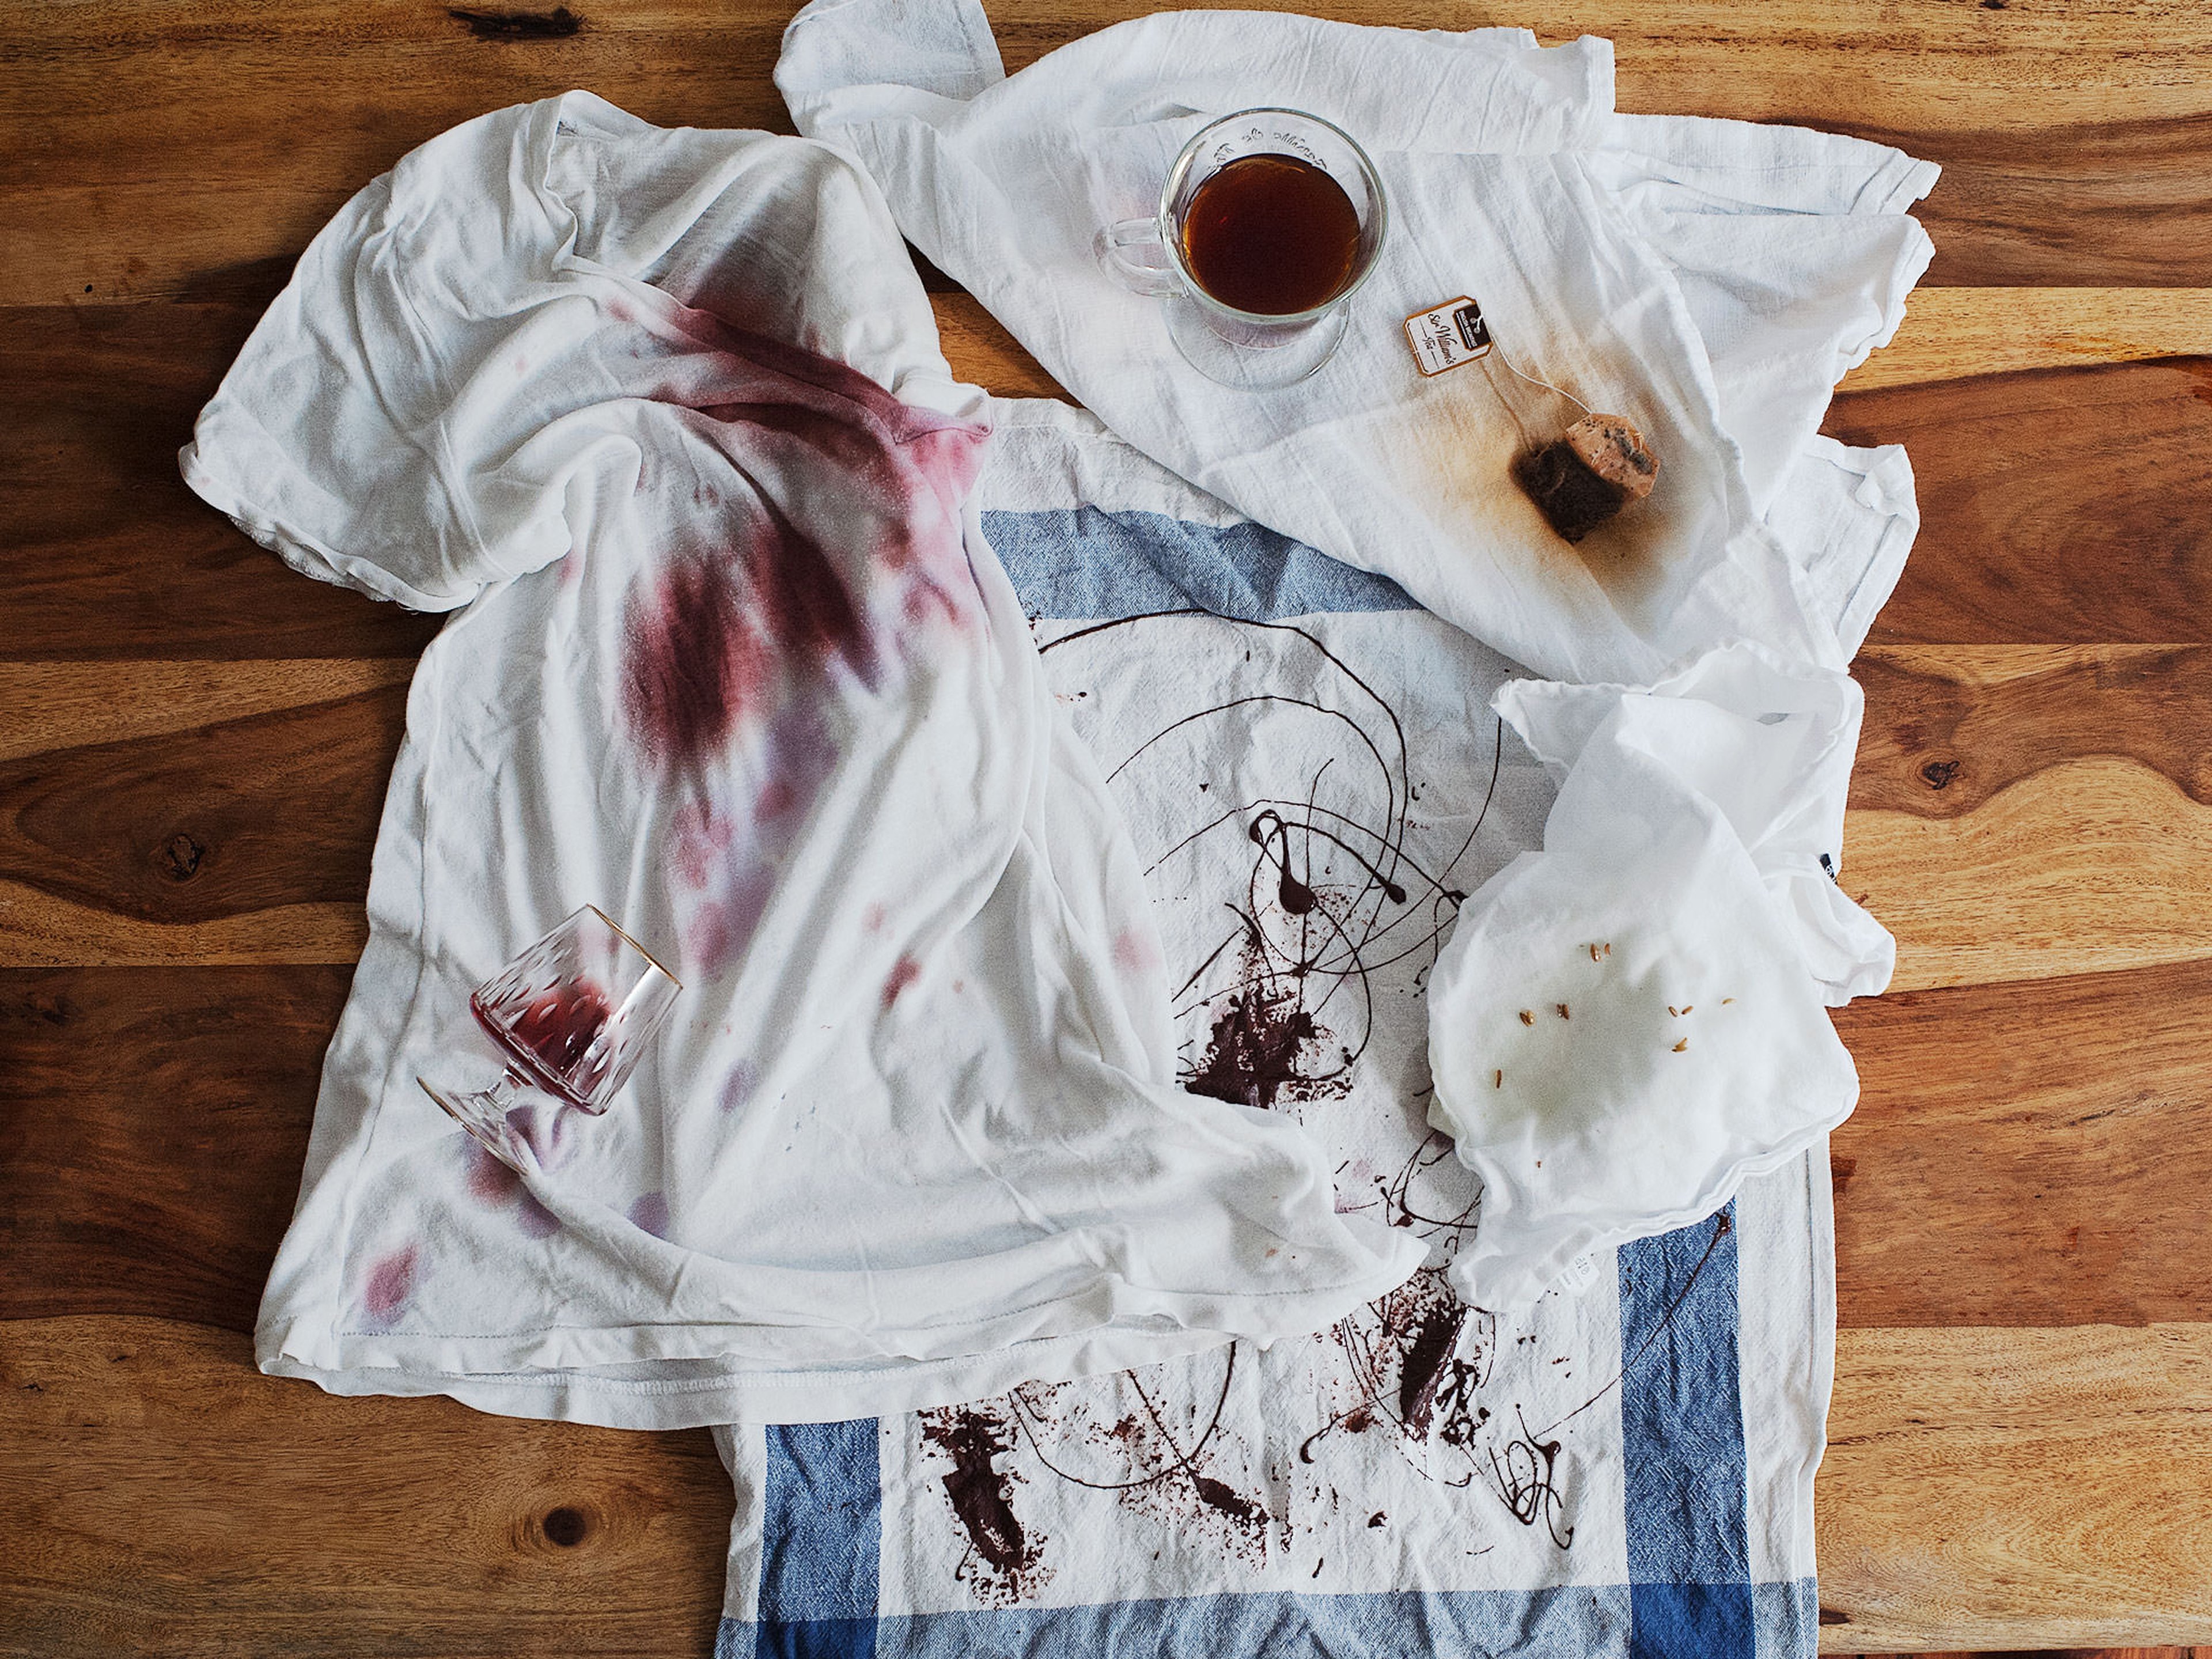 4 Remedies for Common Food Stains